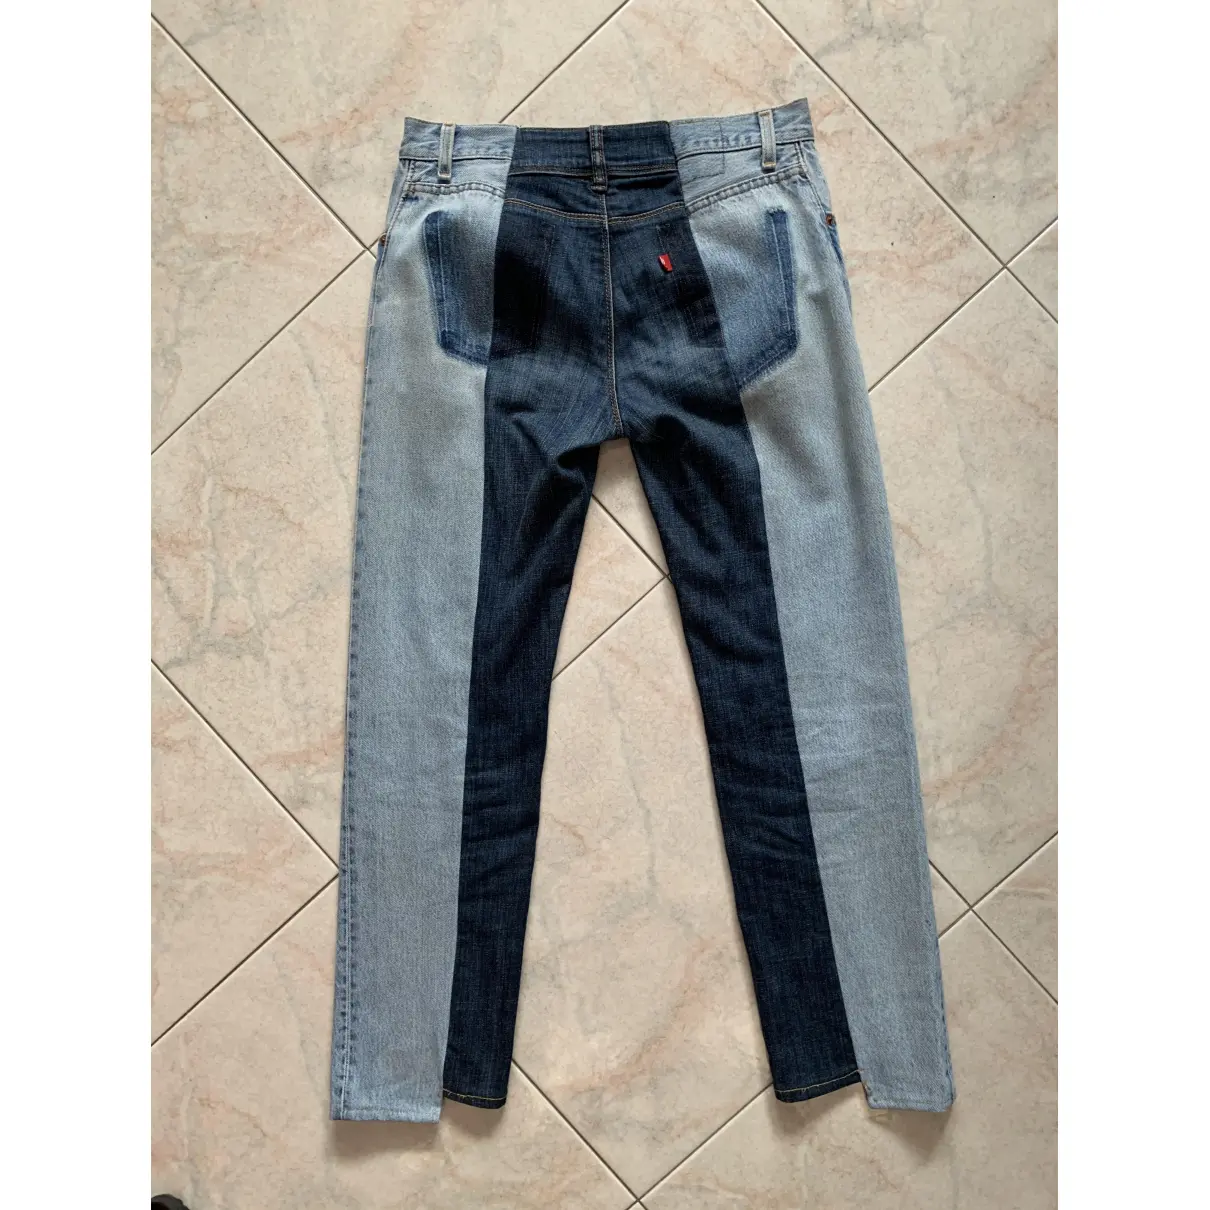 Buy Levi's Made & Crafted Straight jeans online